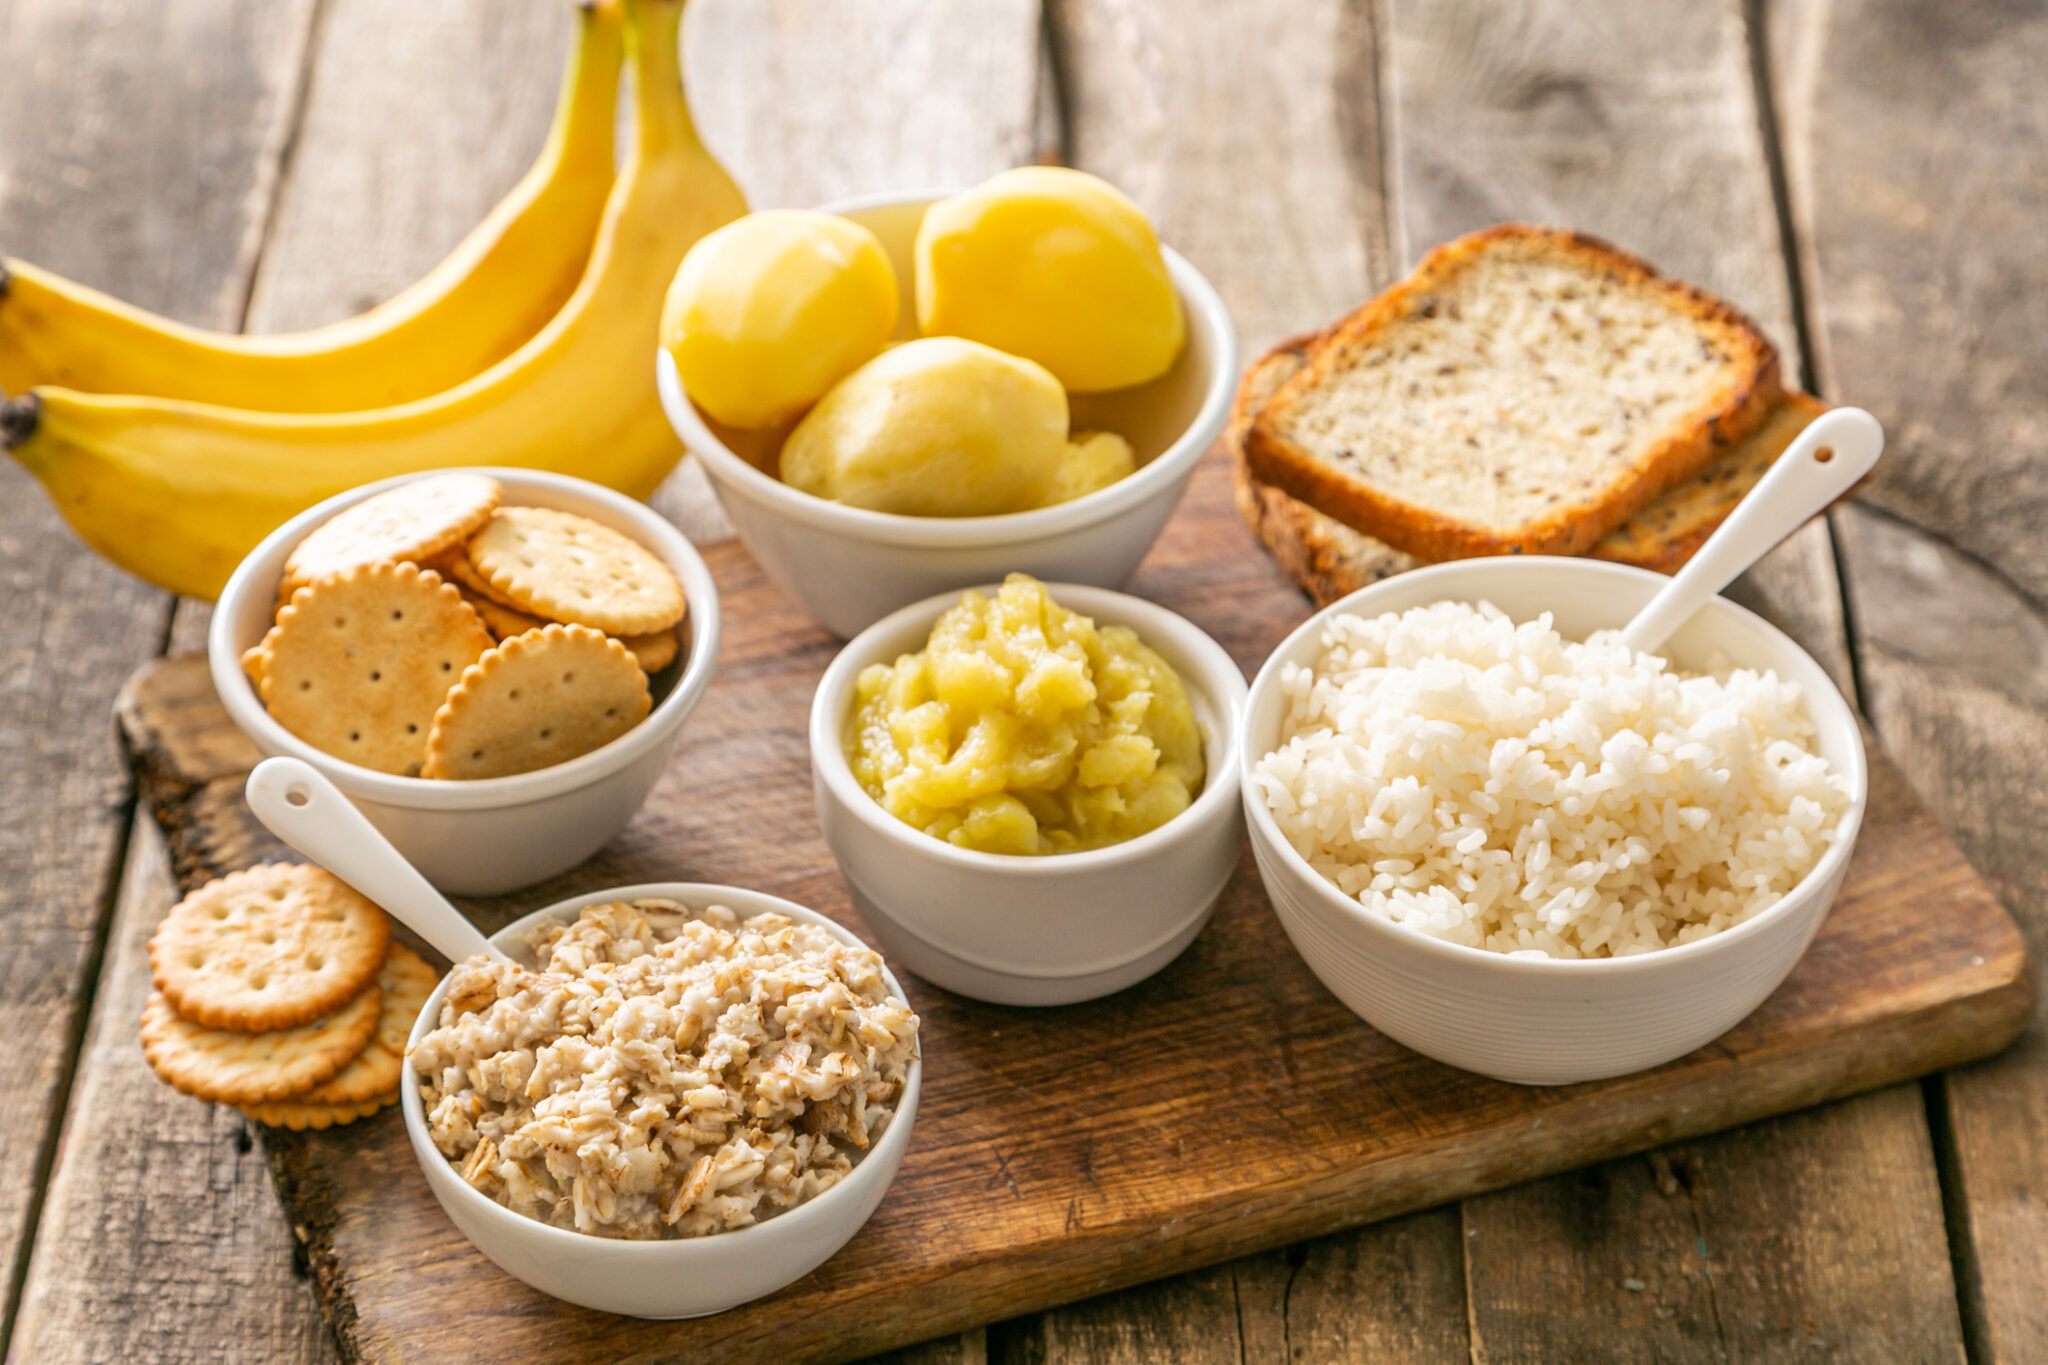 Bananas, biscuits, toast are foods you can supplement when you have diarrhea